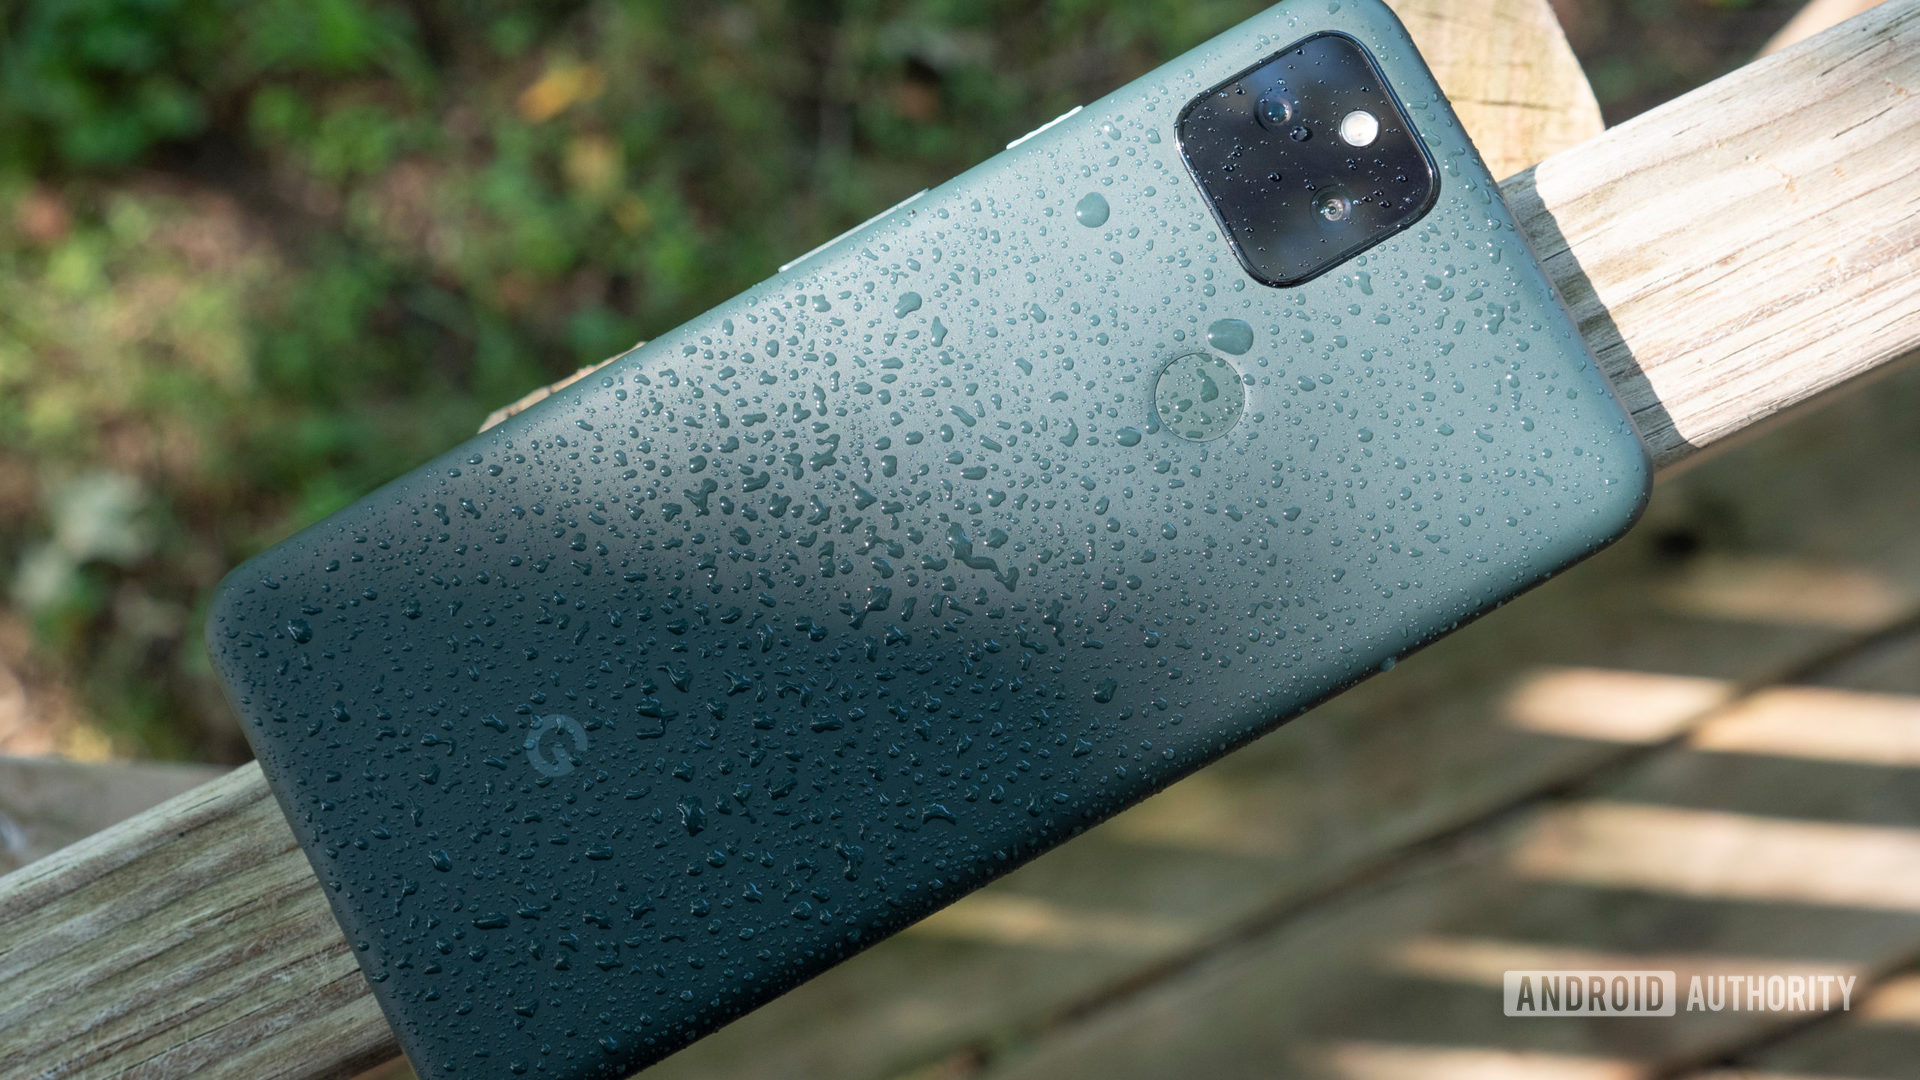 Google Pixel 5a on a bench splashed with water droplets